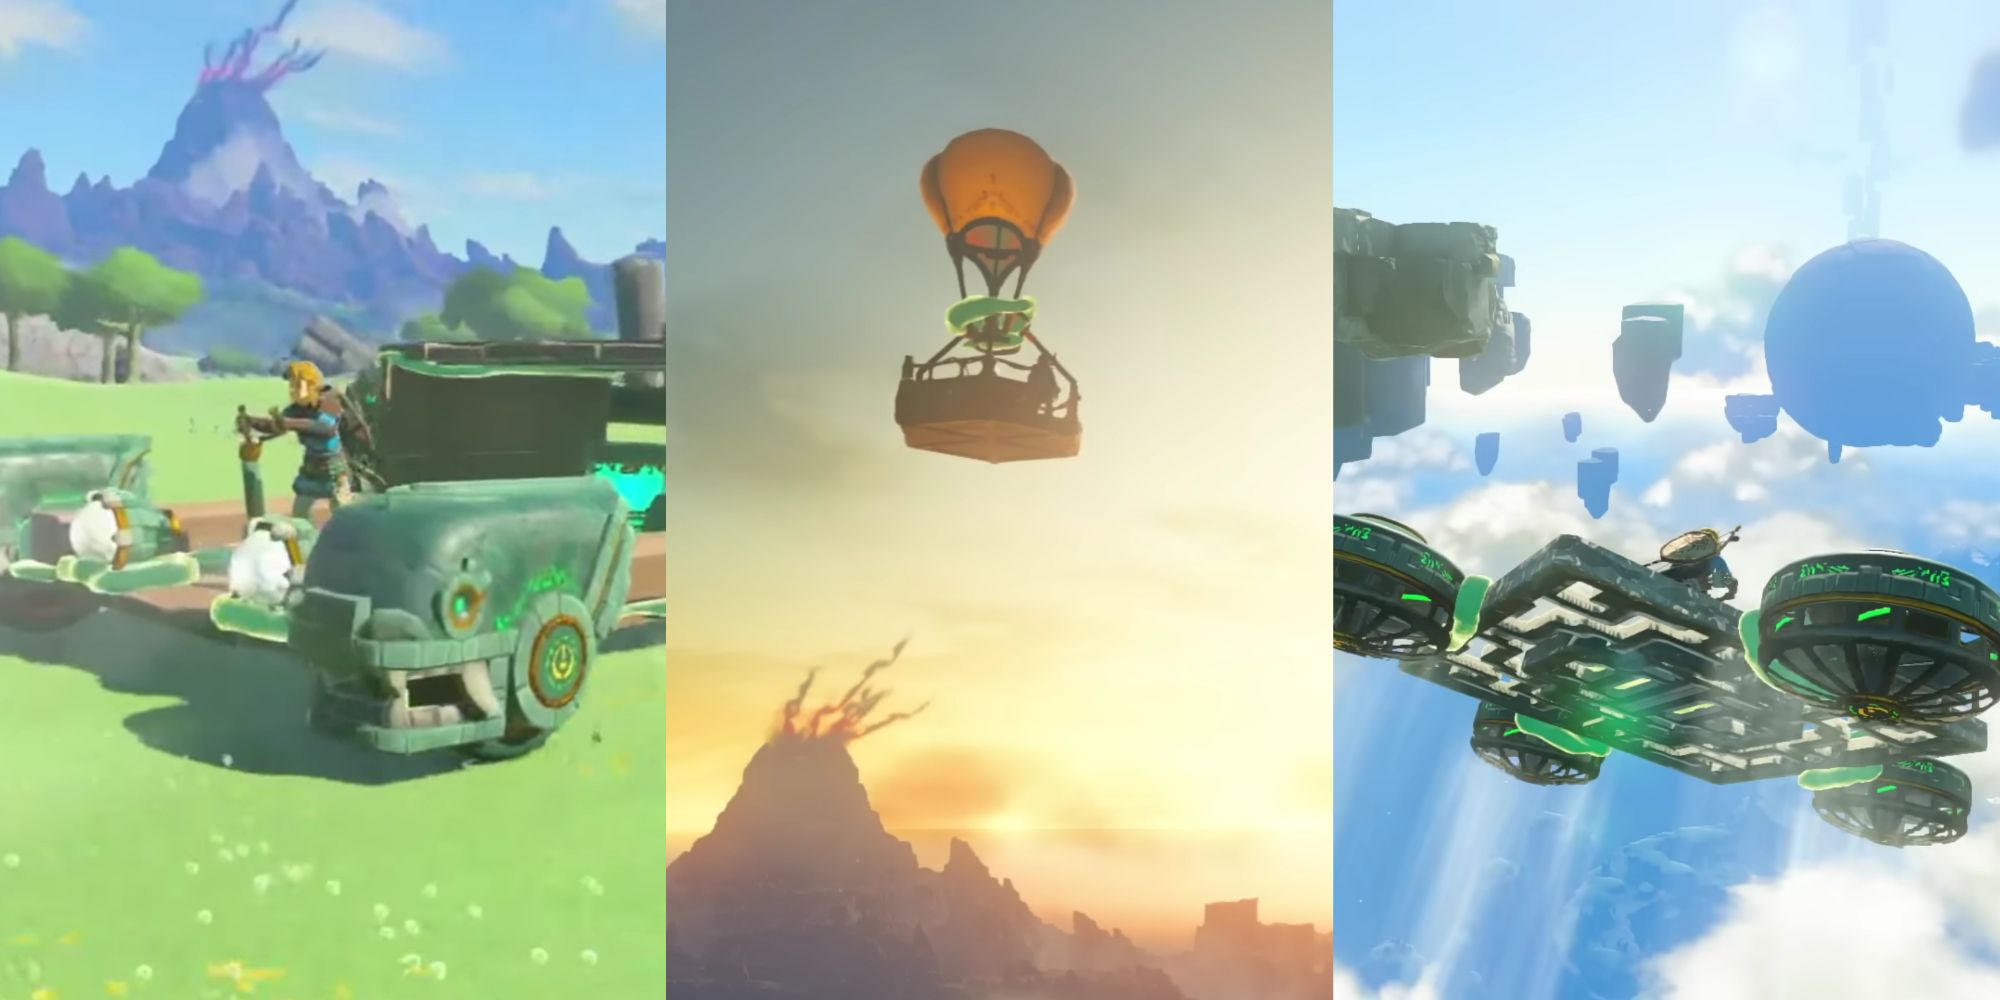 Tears of the Kindgom collage of screenshots showing the three vehicles, featuring the car-like vehicle (left), a hot air balloon (center), and a flying platform (right)